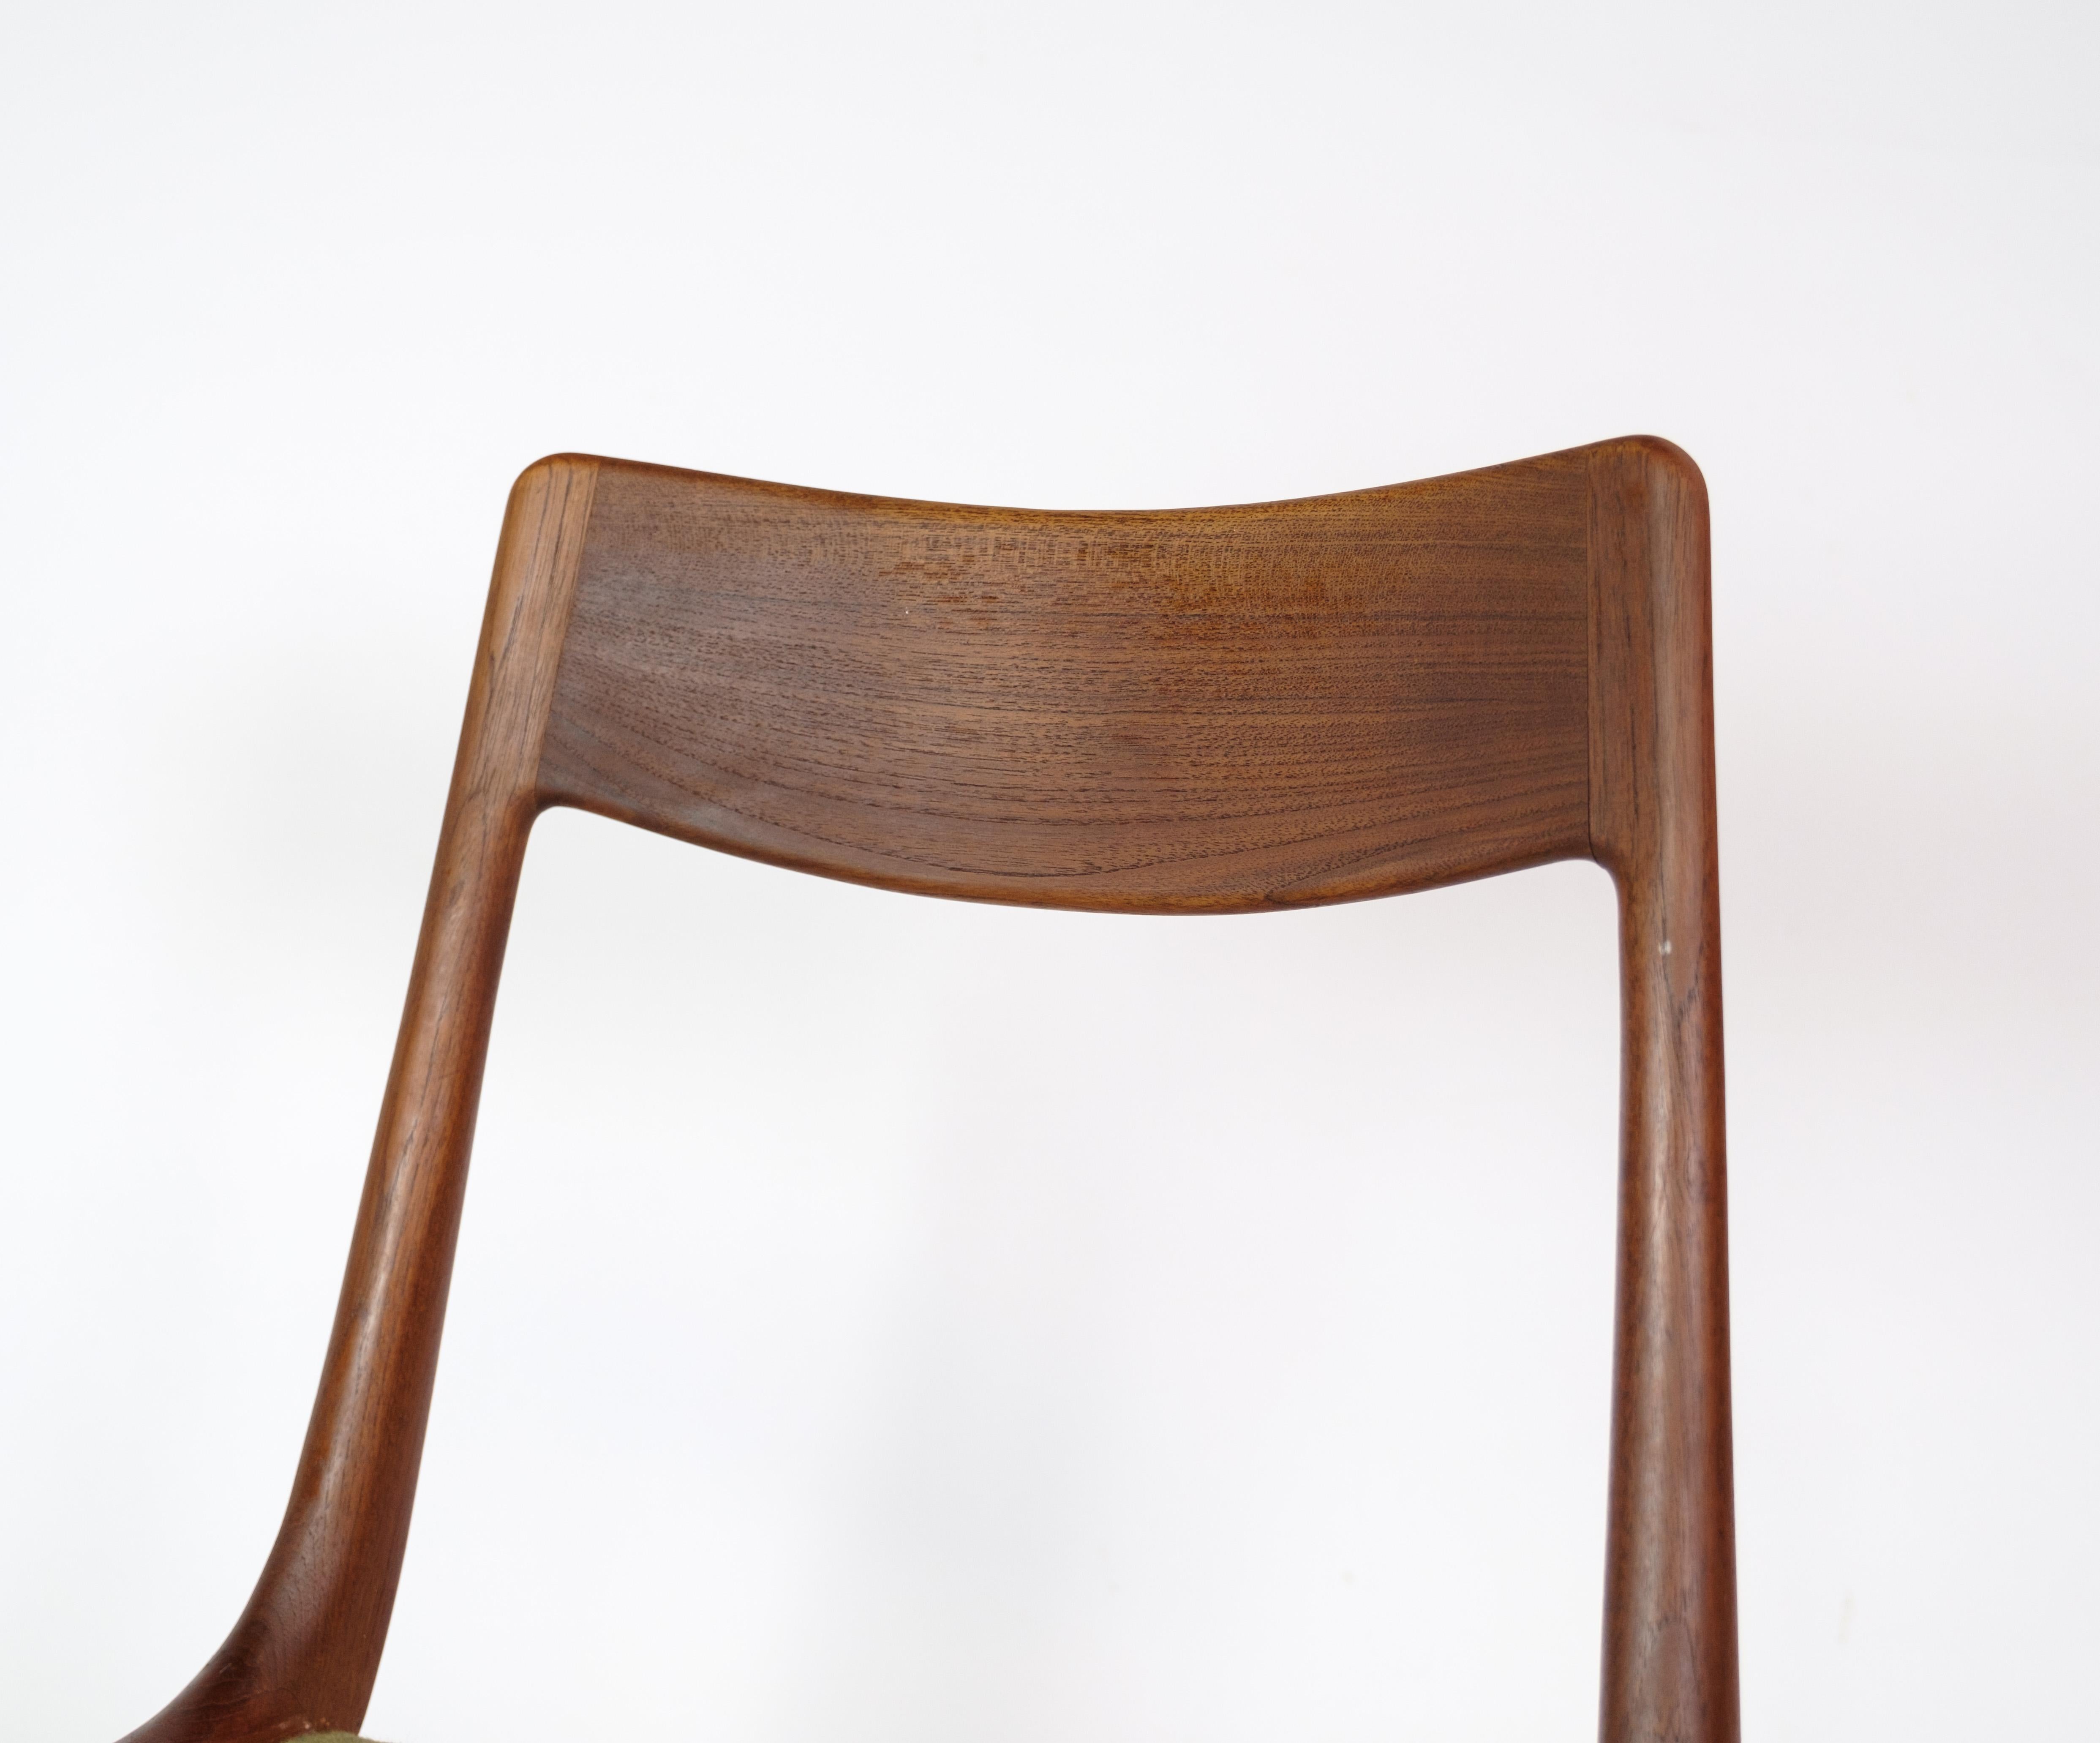 Set of four dining room chairs, Model Boomerang, designed by Alfred Christensen in teak wood manufactured by Slagelse Møbelfabrik in the 1960s. The chairs are made of solid teak with a seat of green striped fabric. Appears in incredibly beautiful